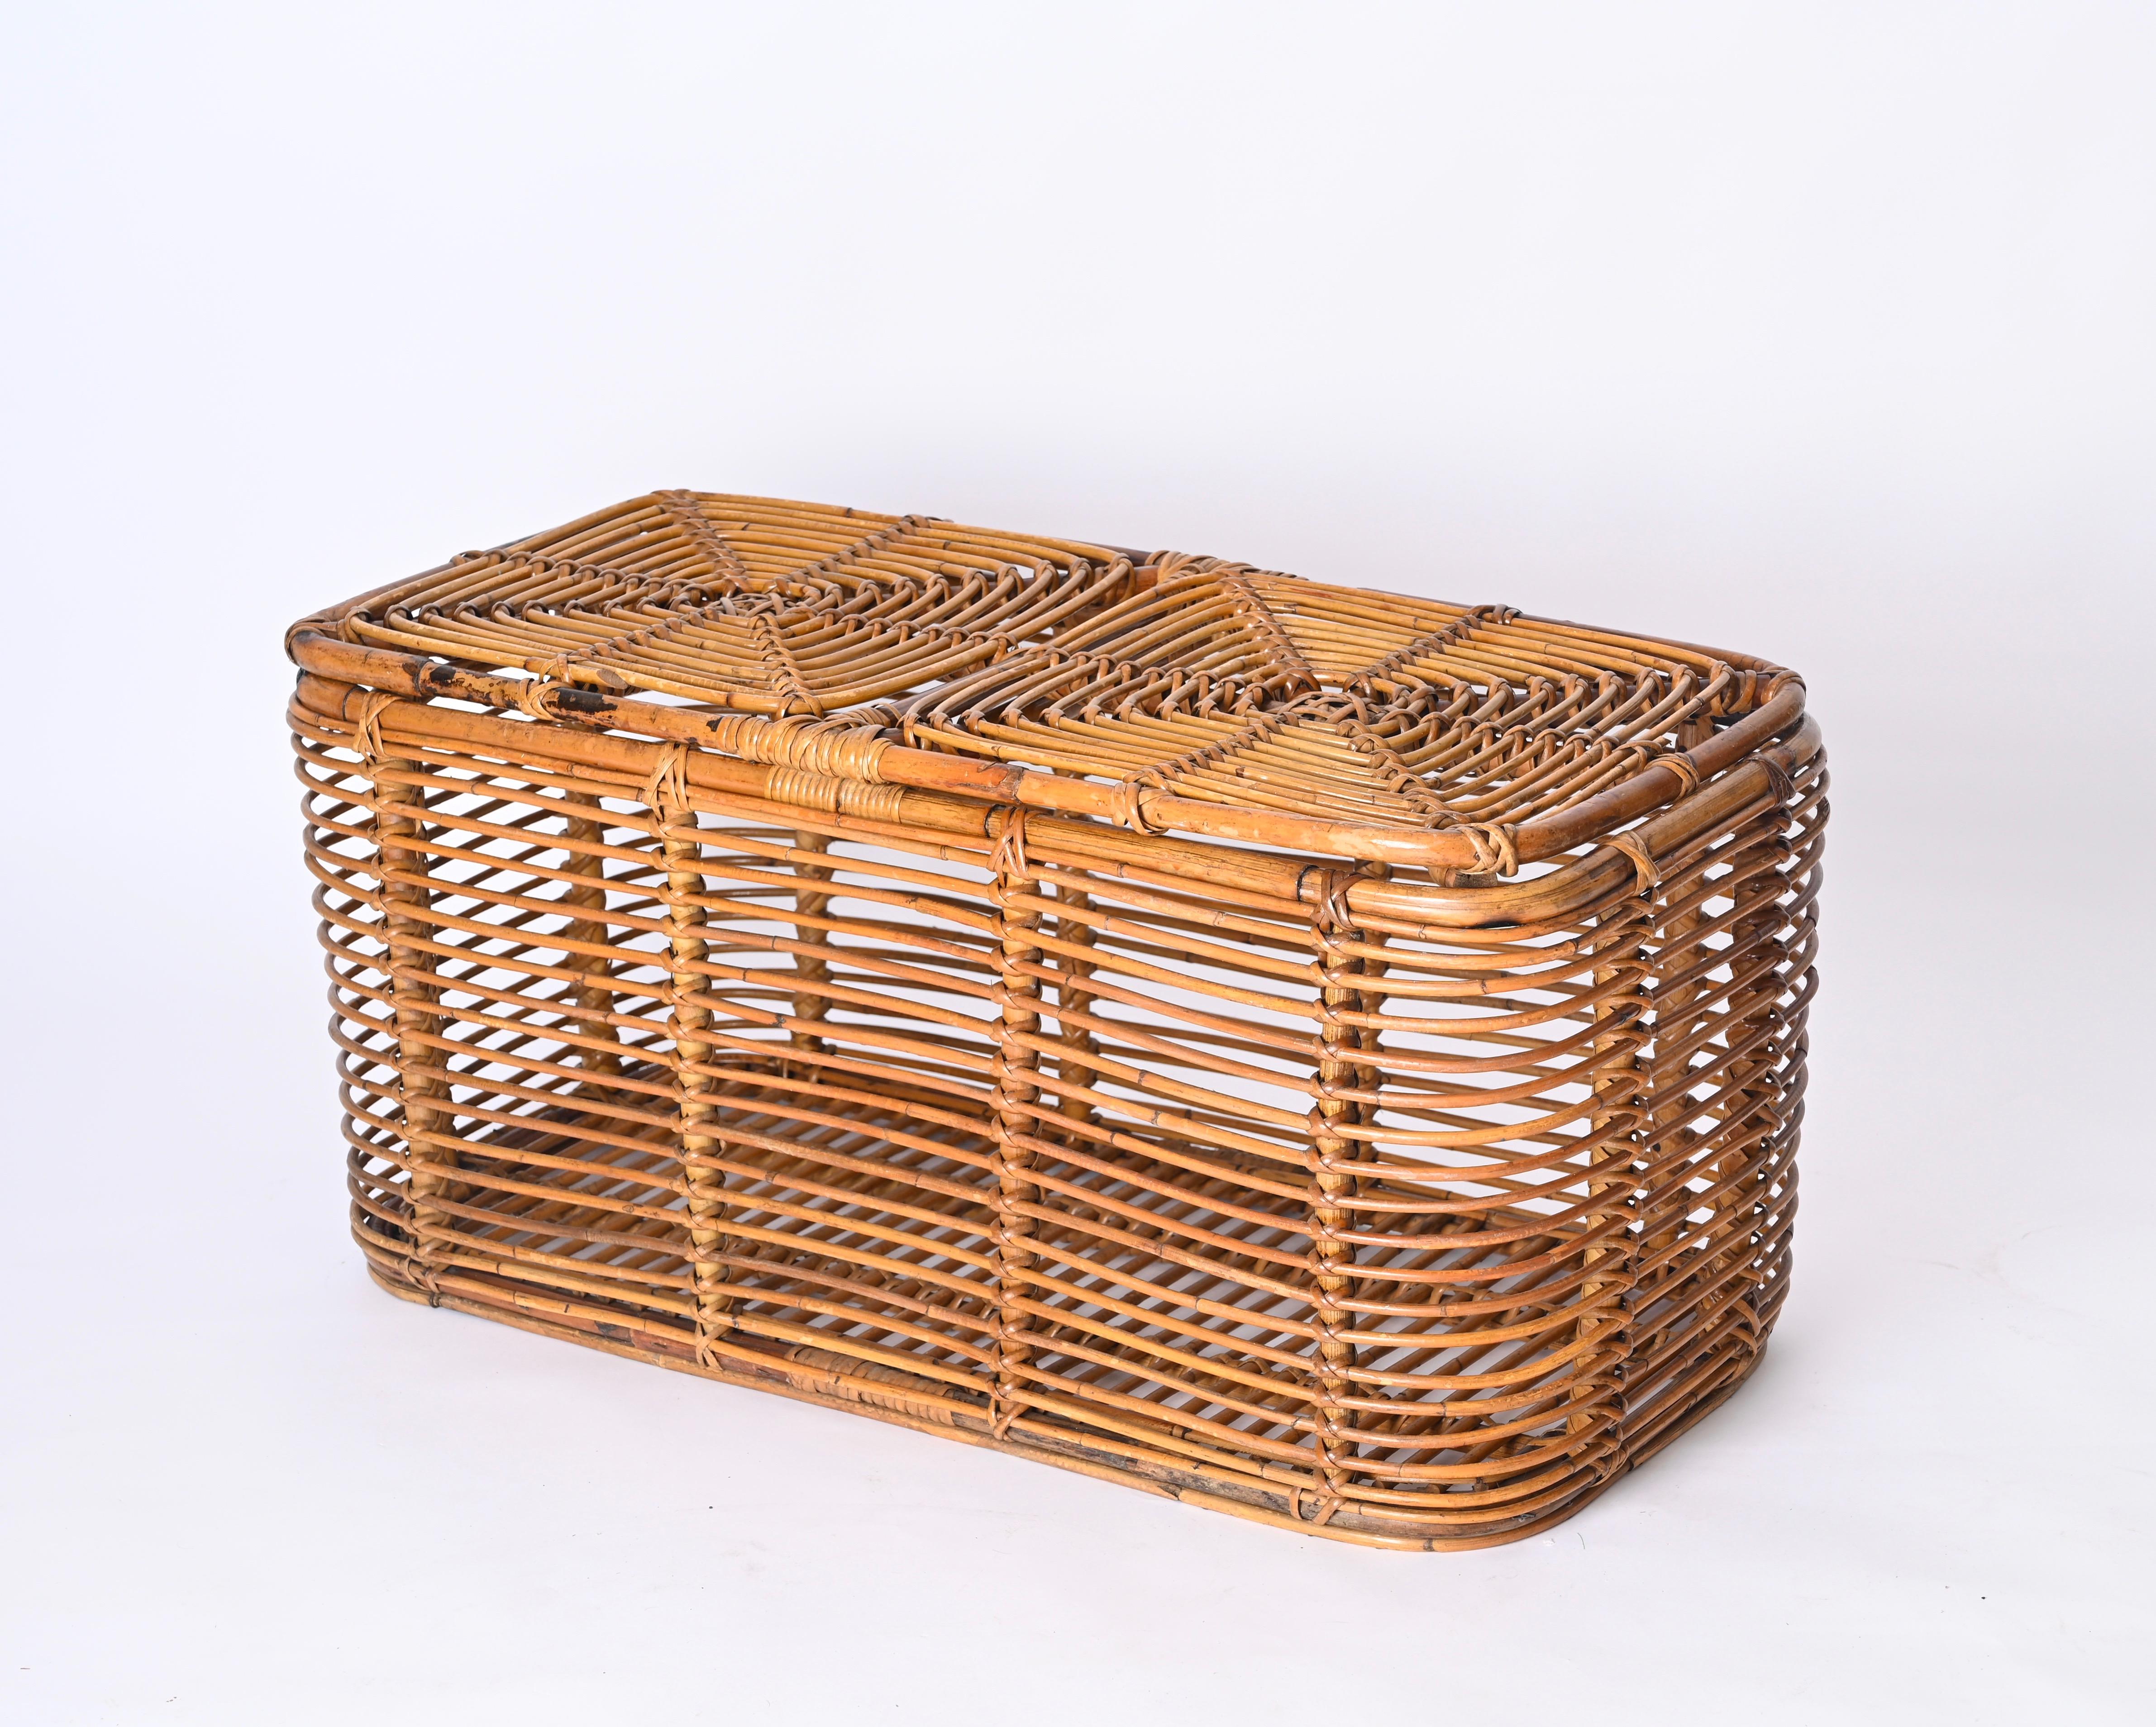 Midcentury French Riviera Bamboo and Woven Rattan Italian Basket, 1960s For Sale 5